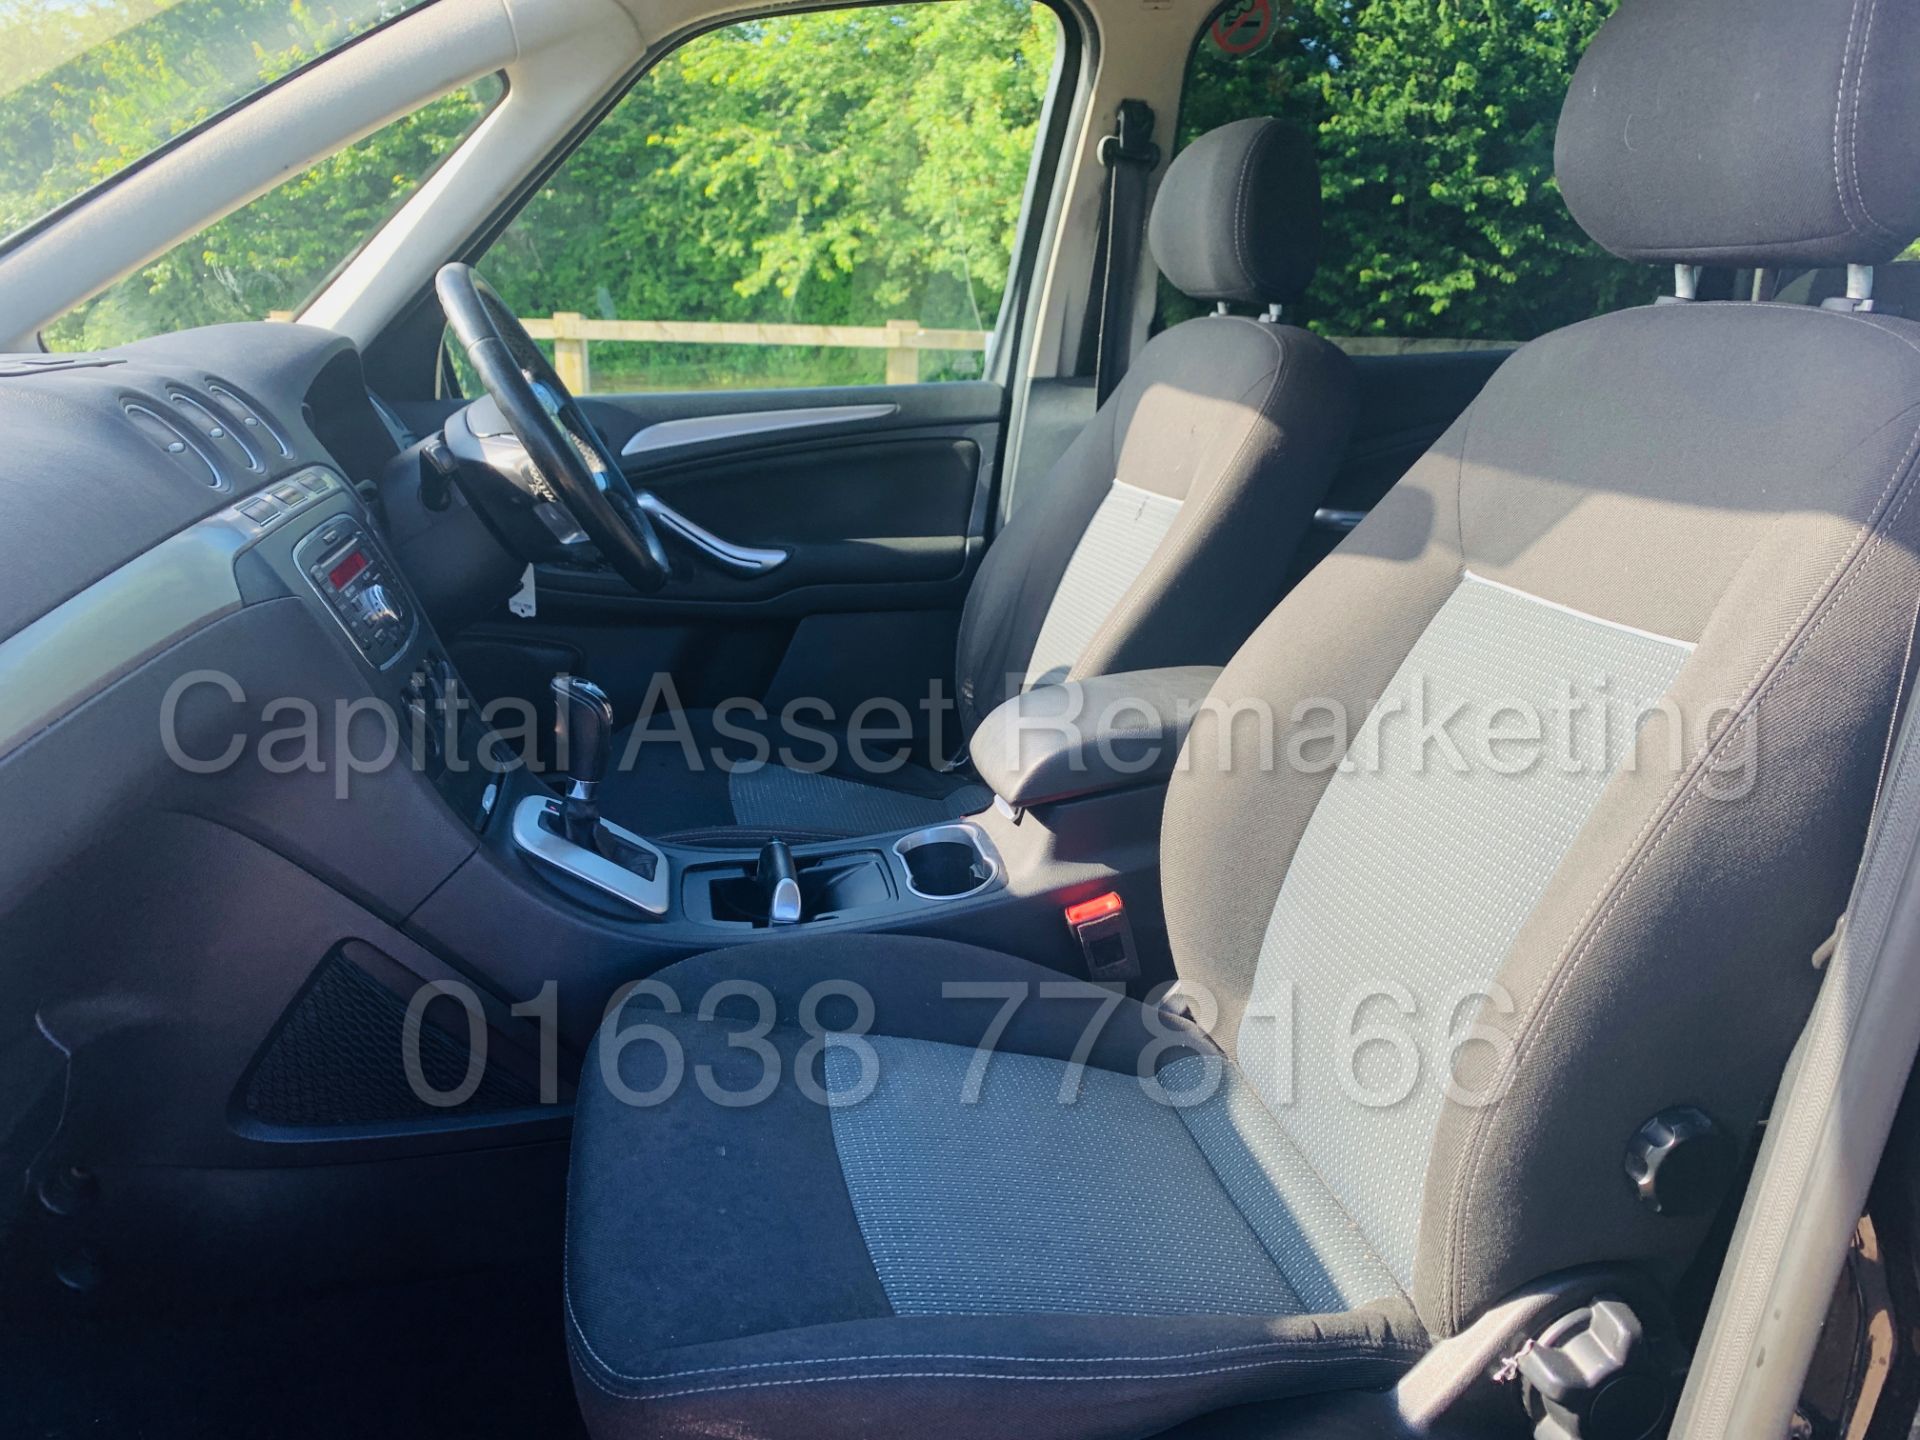 (ON SALE) FORD GALAXY *ZETEC* 7 SEATER MPV (2013) '2.0 TDCI - POWER SHIFT' (NO VAT - SAVE 20%) - Image 13 of 31